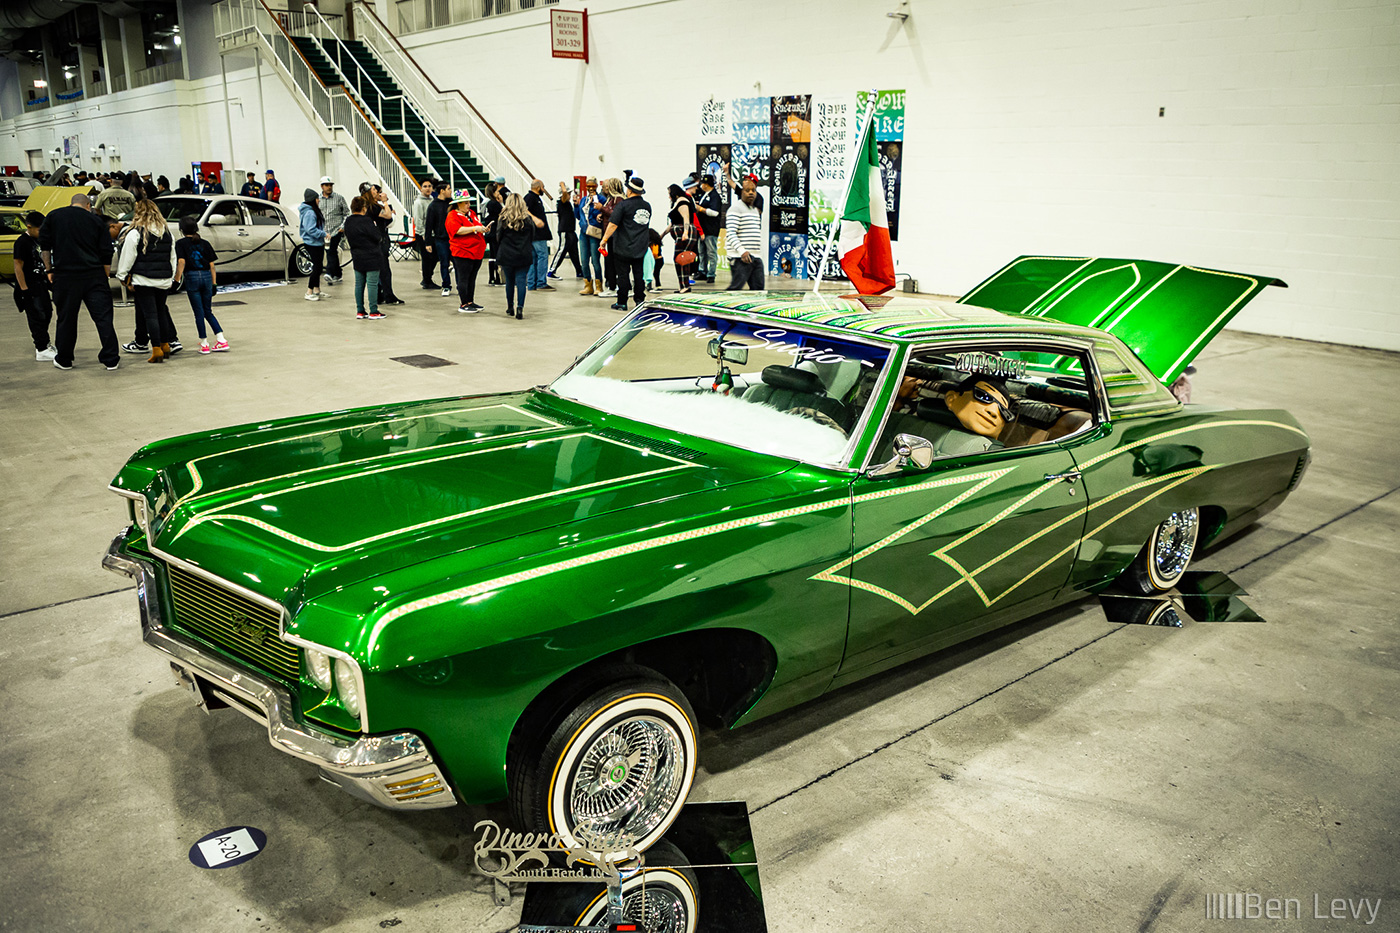 Green Chevy Caprice Lowrider from South Bend